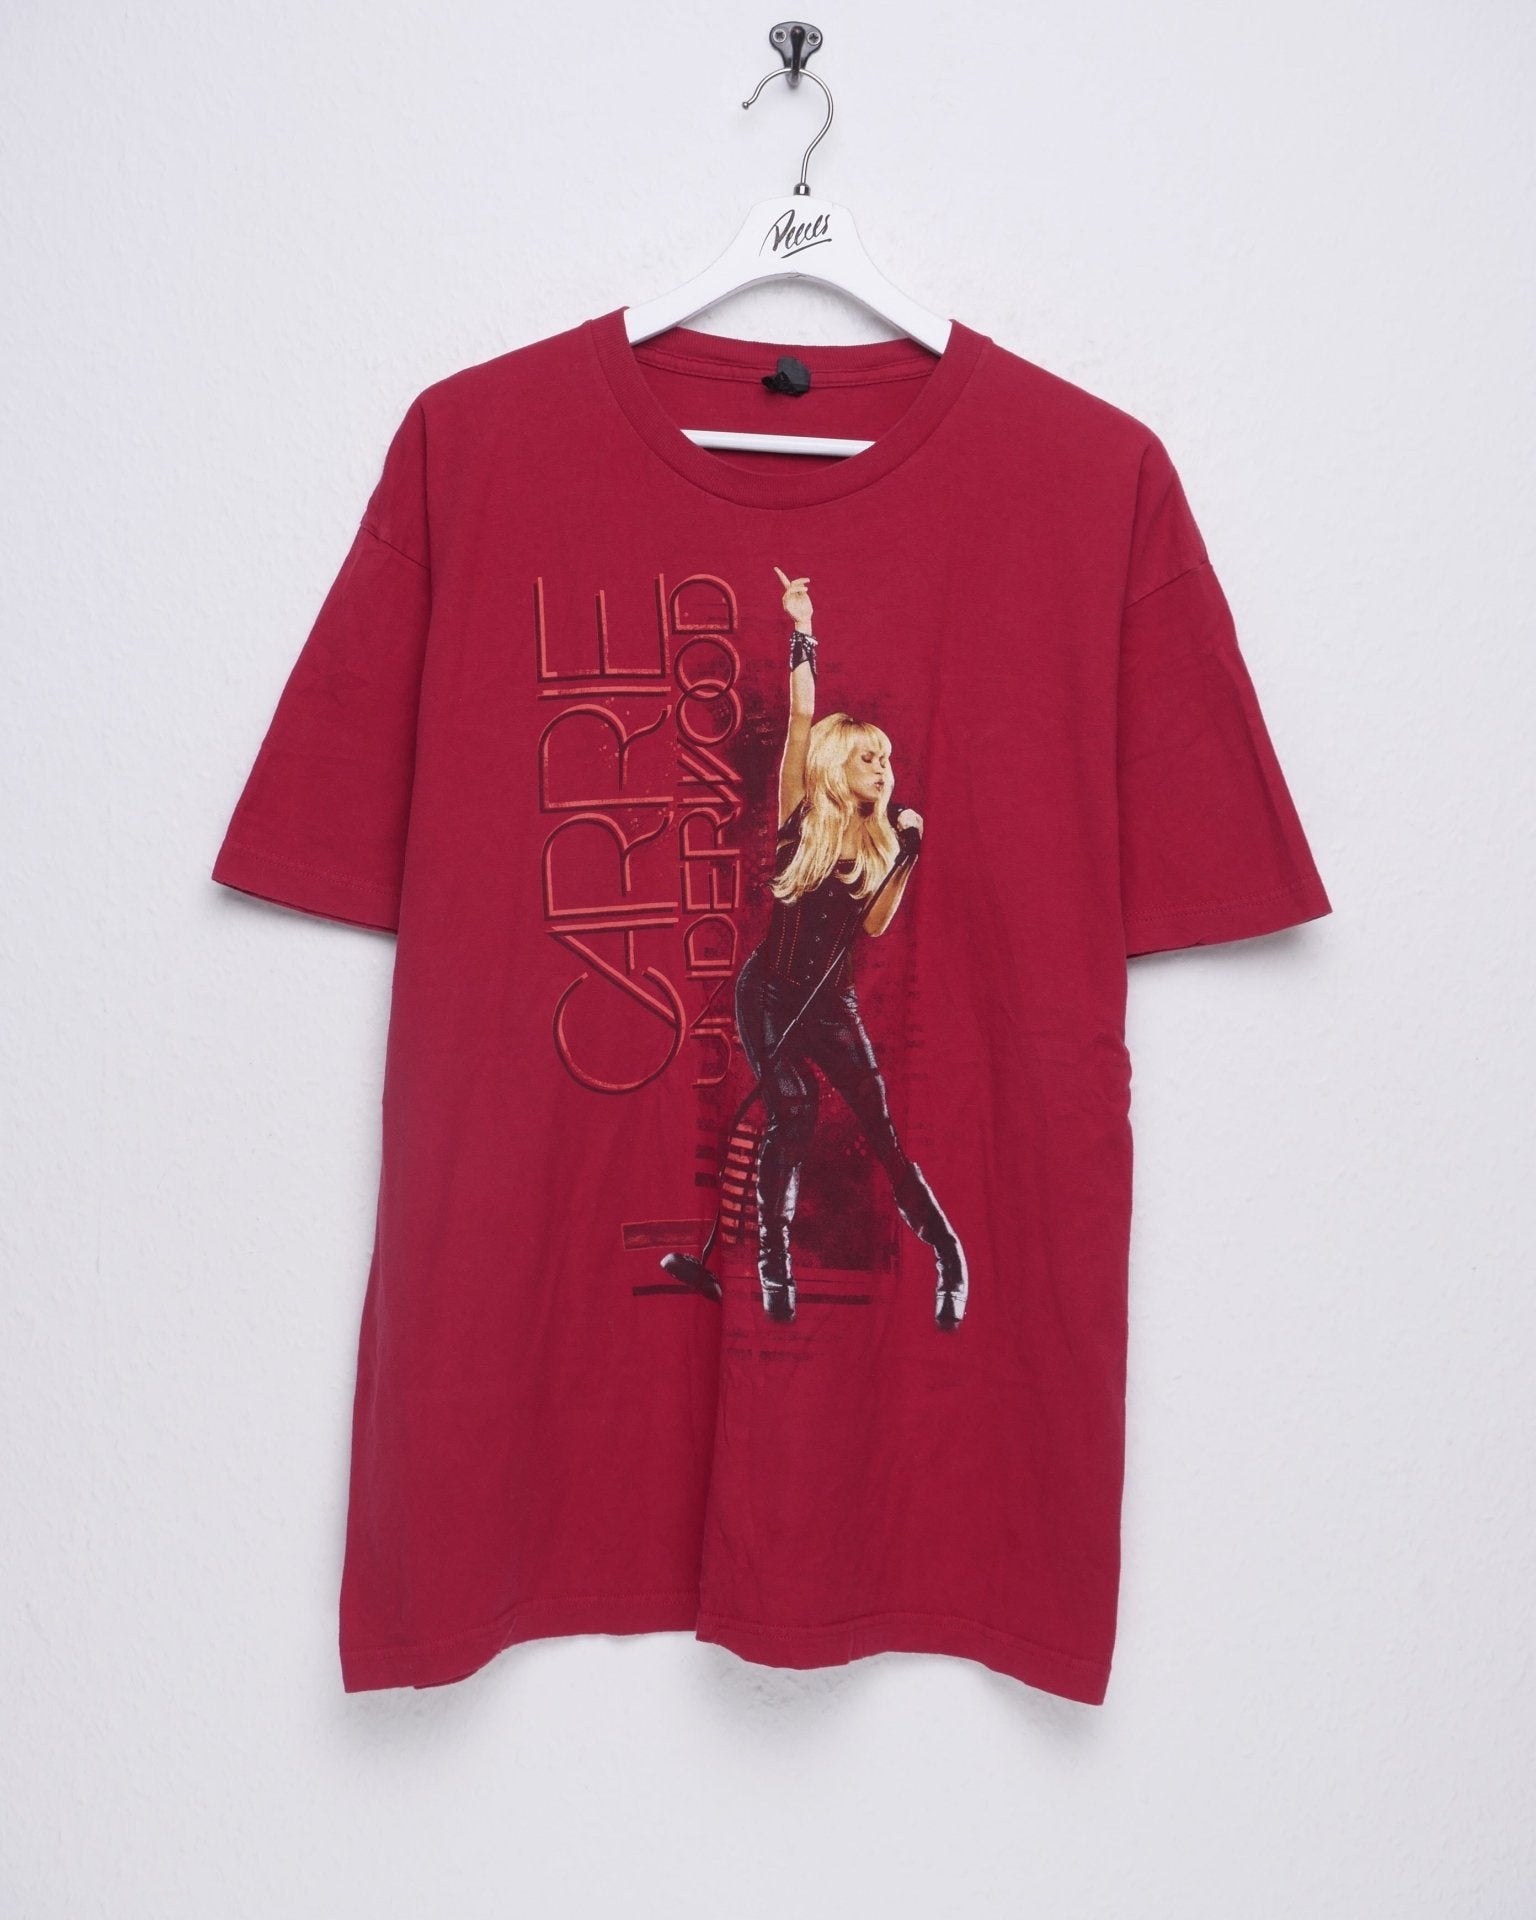 Carrie Underwood Tour 2015 printed Graphic red Shirt - Peeces